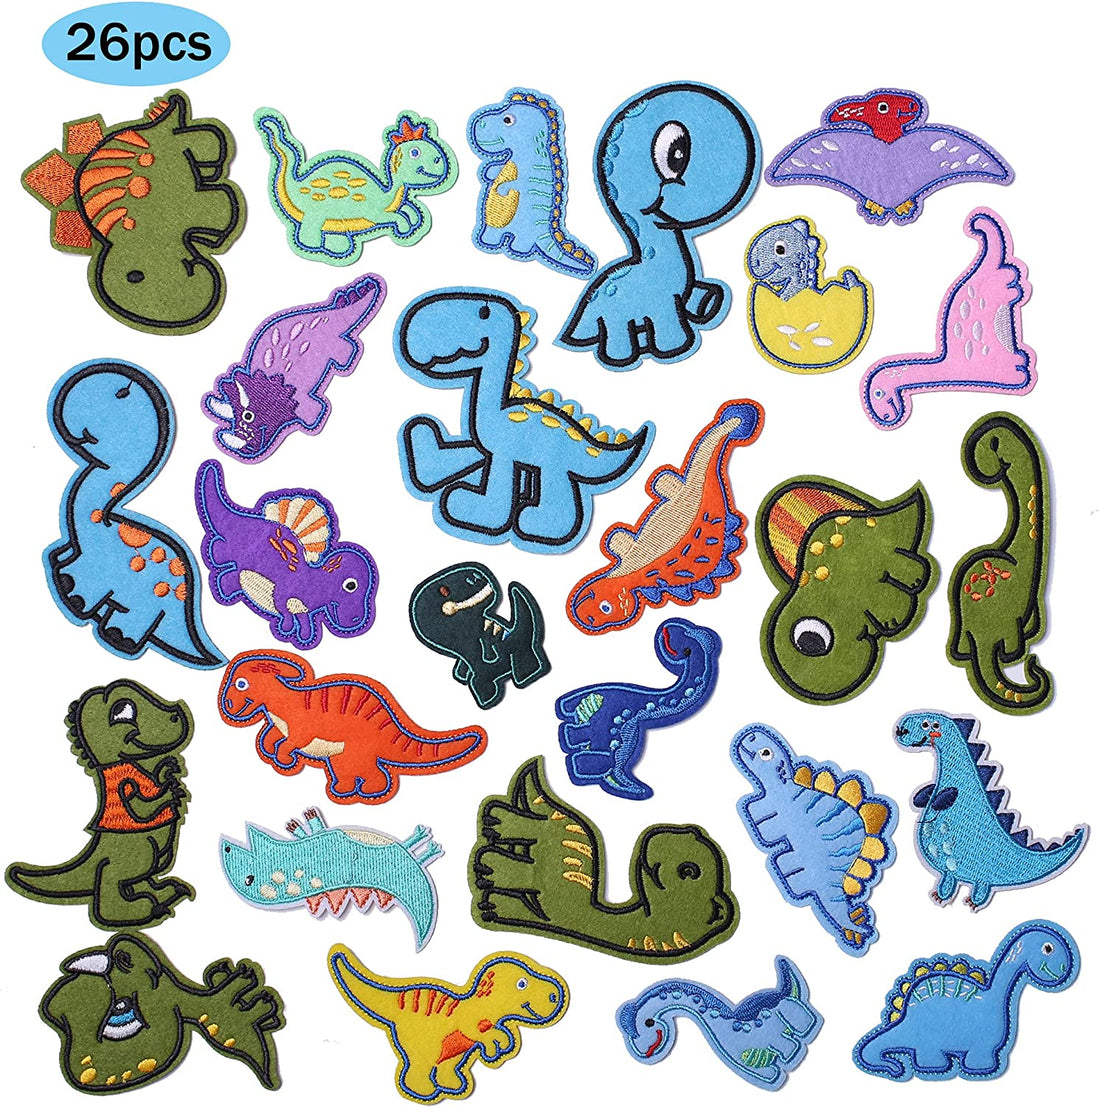 60Pcs Random Assorted Iron on Patches Cute Sew on/Iron on Embroidered  Applique Patches for Jackets Hats Backpacks Jeans DIY Accessories 1.Random  60Pcs